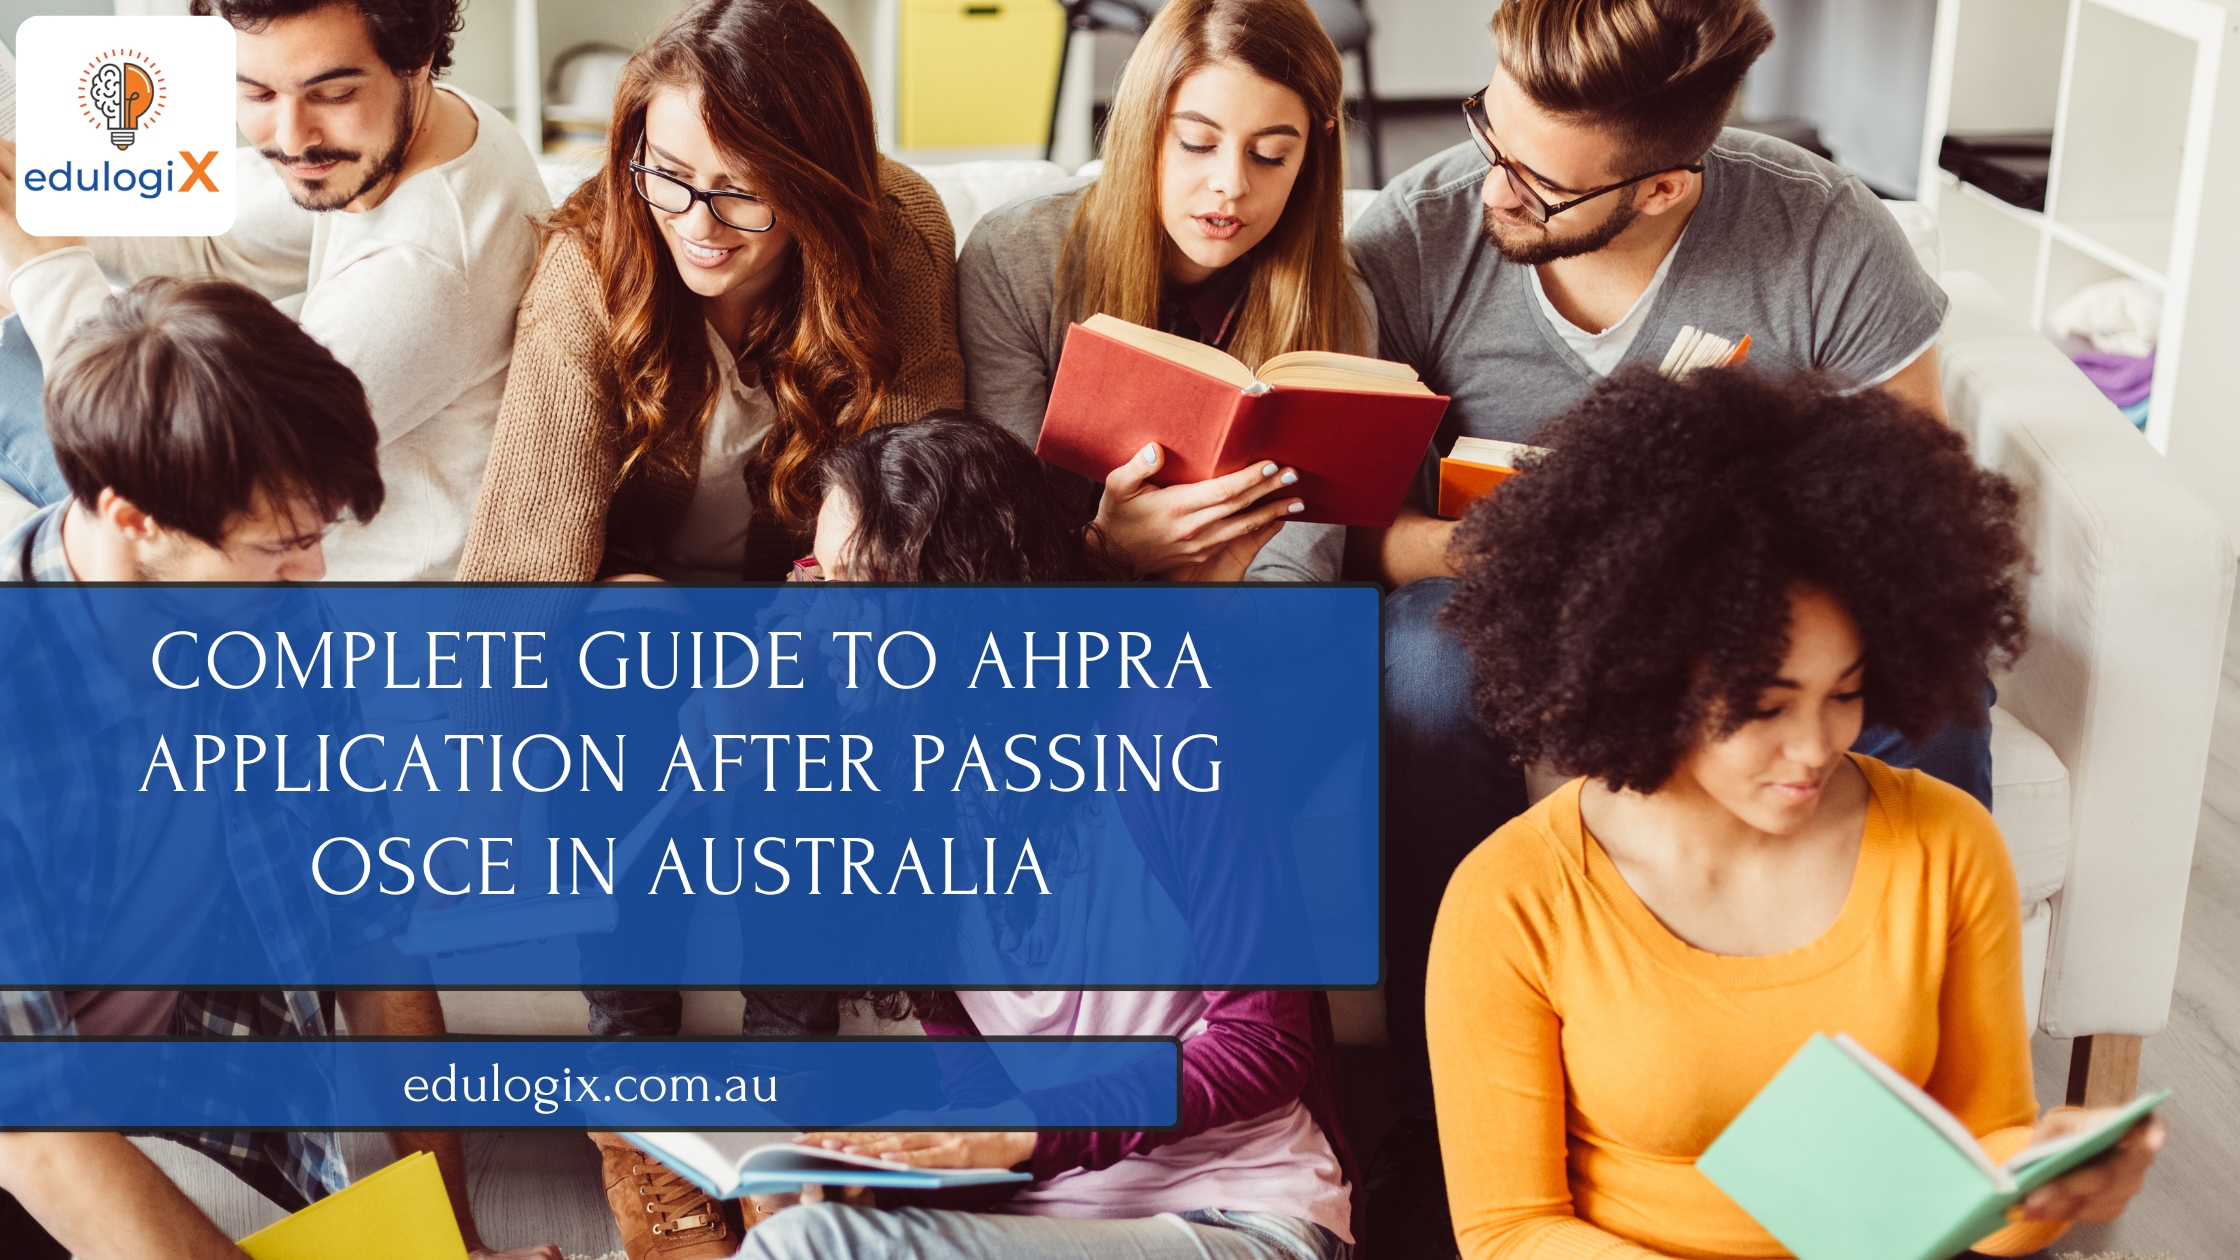 Complete Guide to AHPRA Application After Passing OSCE in Australia | Edulogix